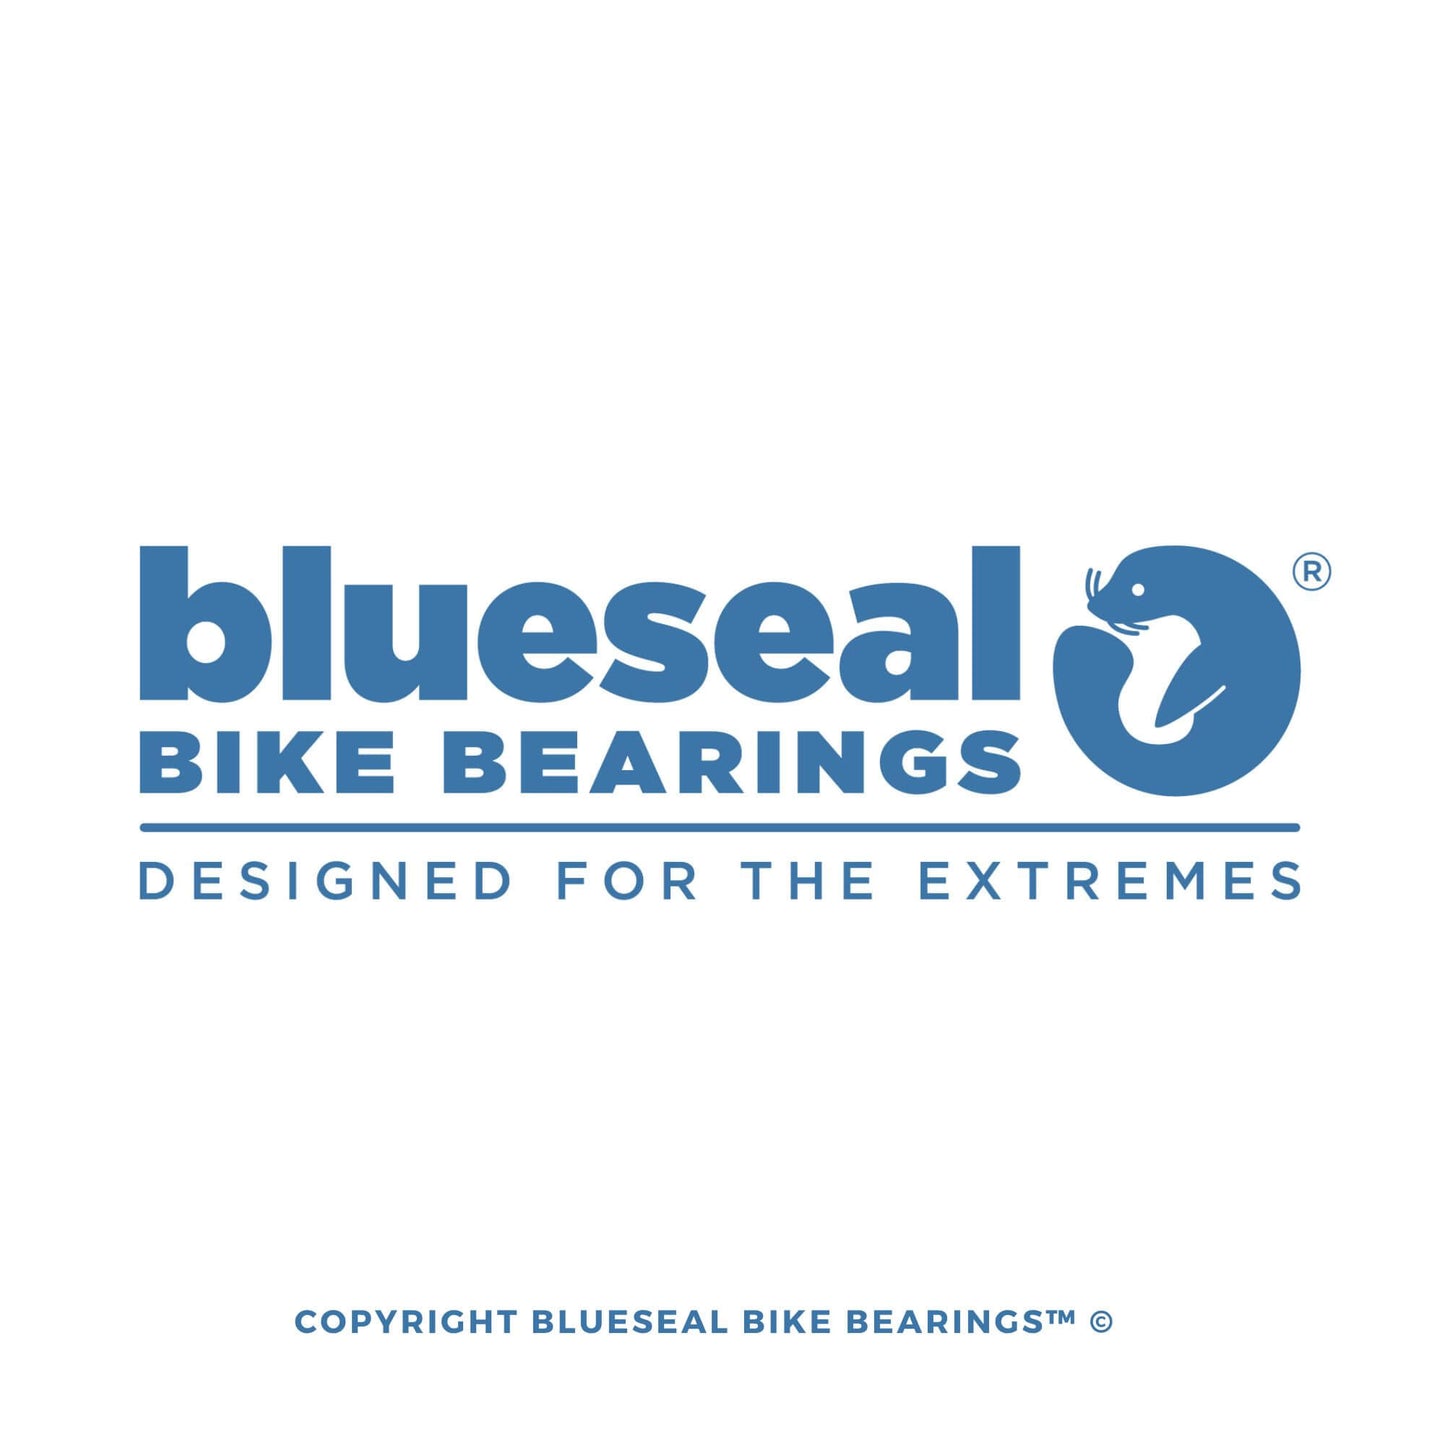 Specialized Headset Bearings - Trailvision - Bicycle Bearing Suppliers